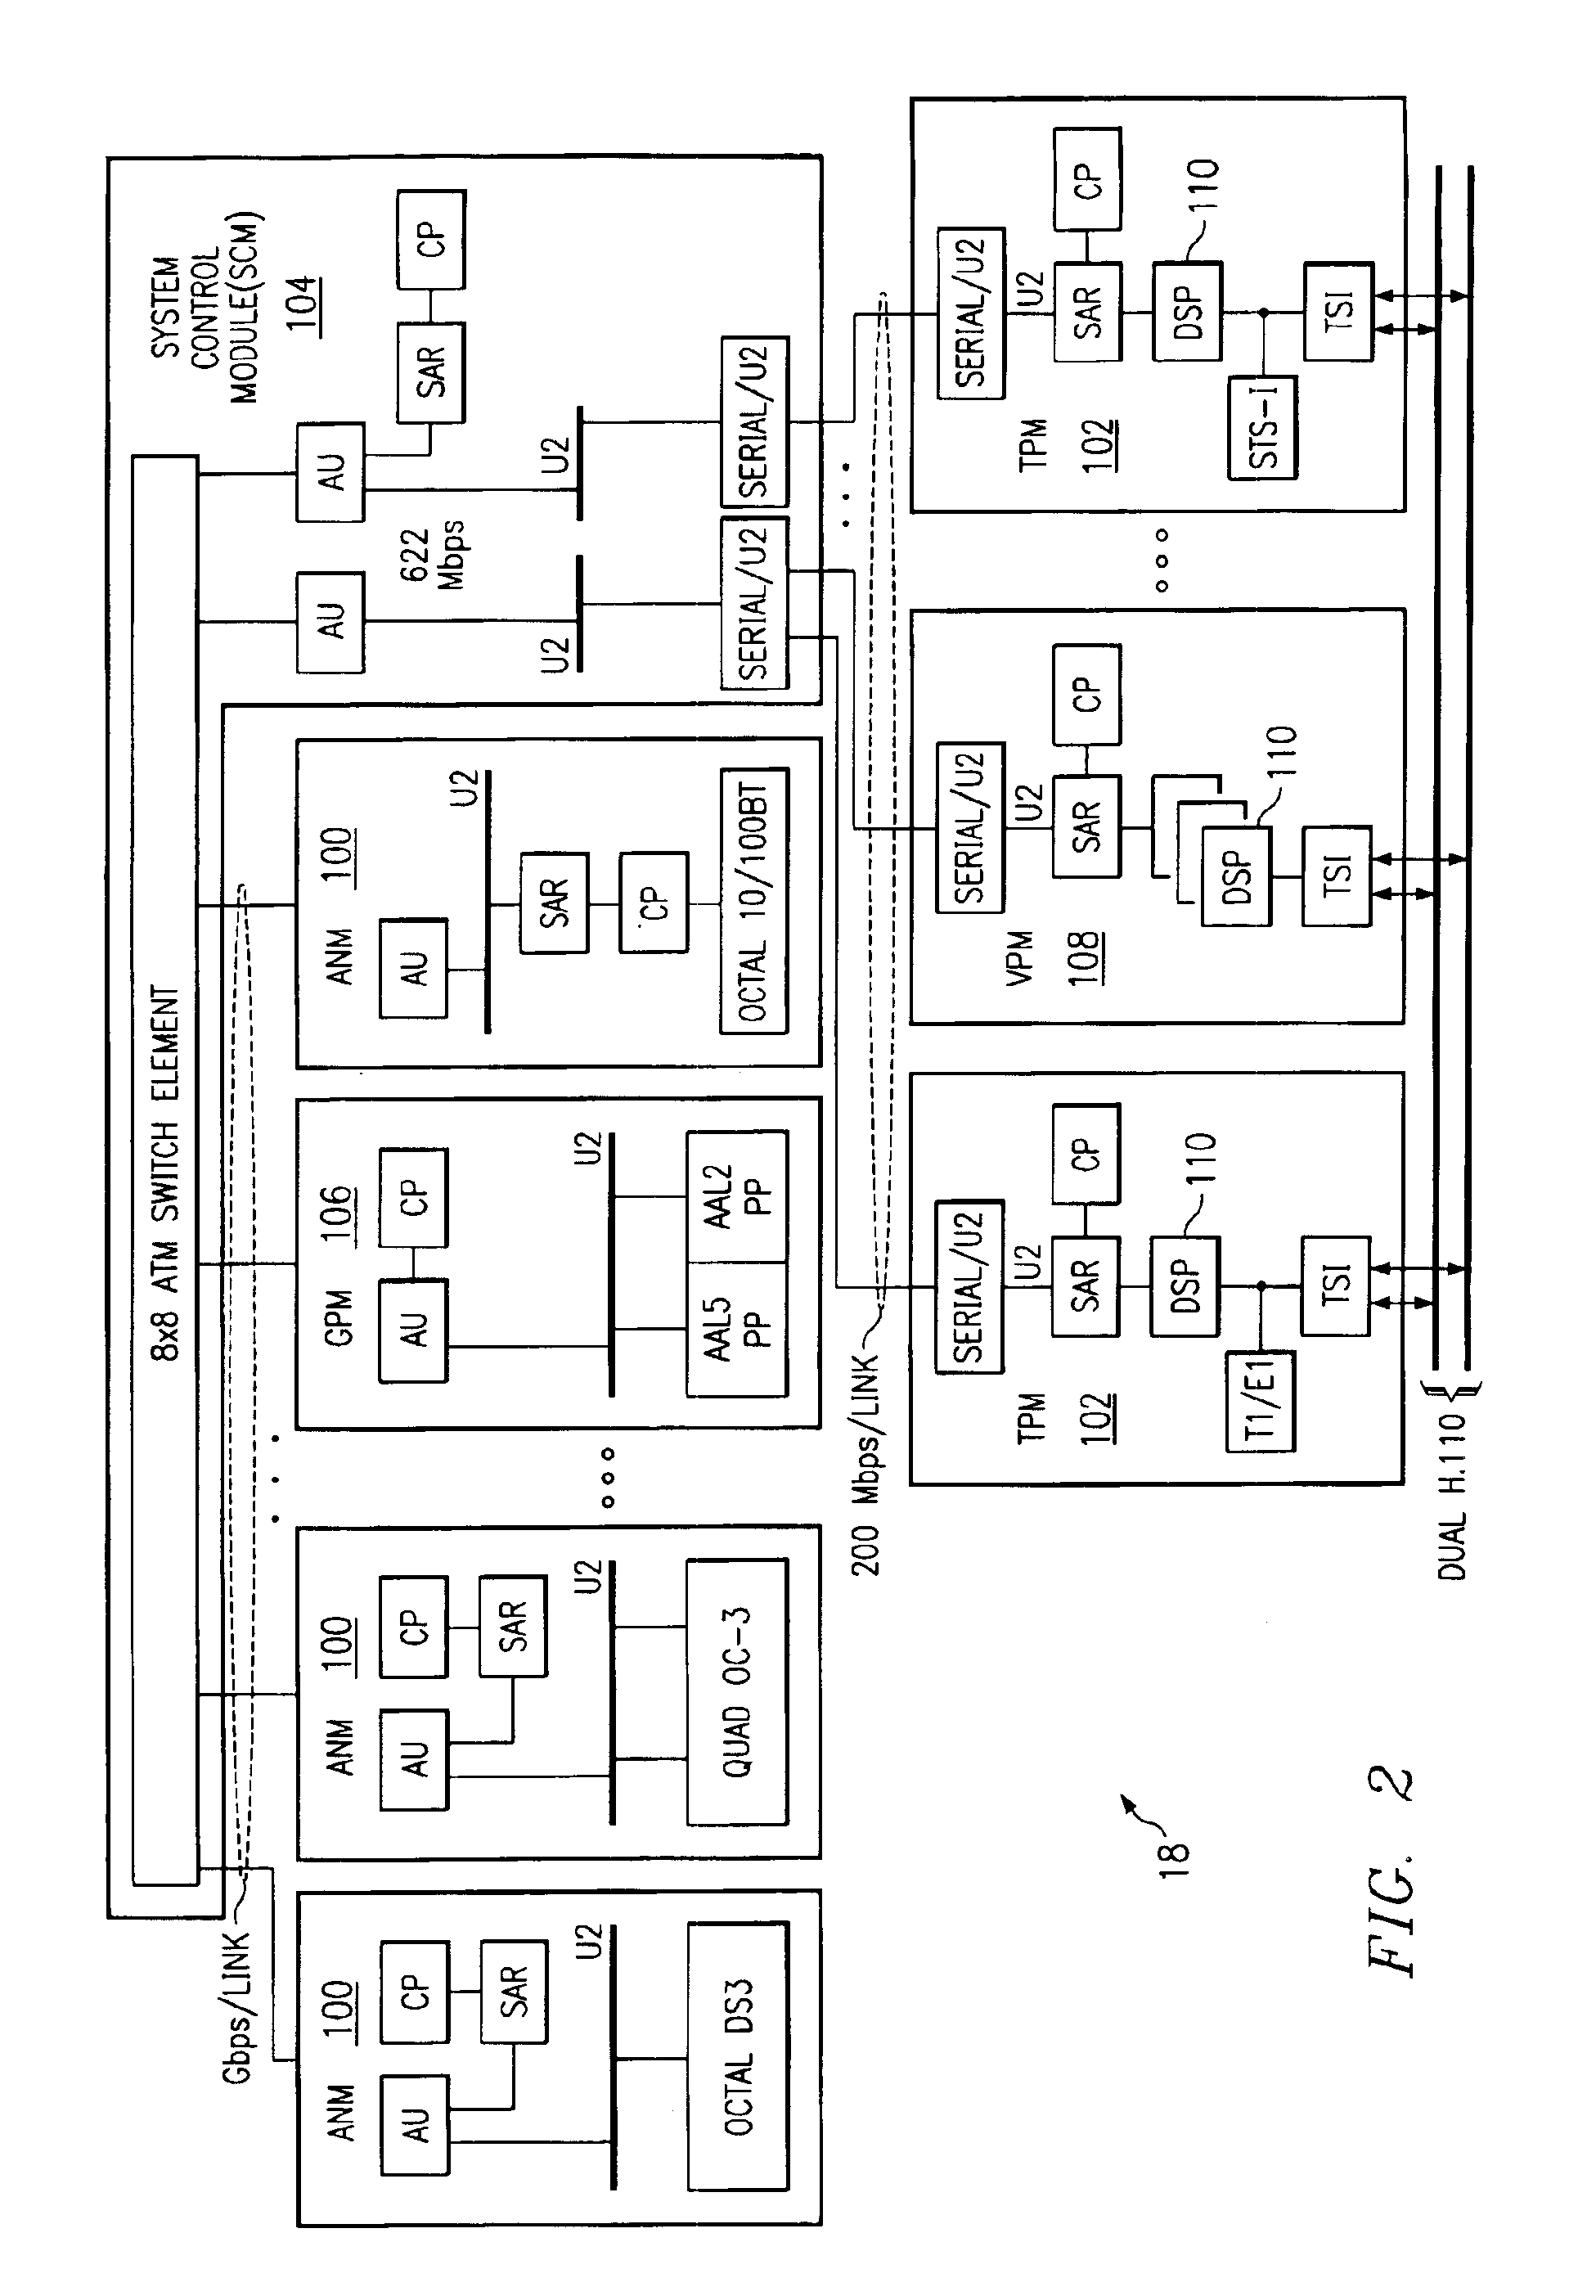 System and method for interfacing telephony voice signals with a broadband access network